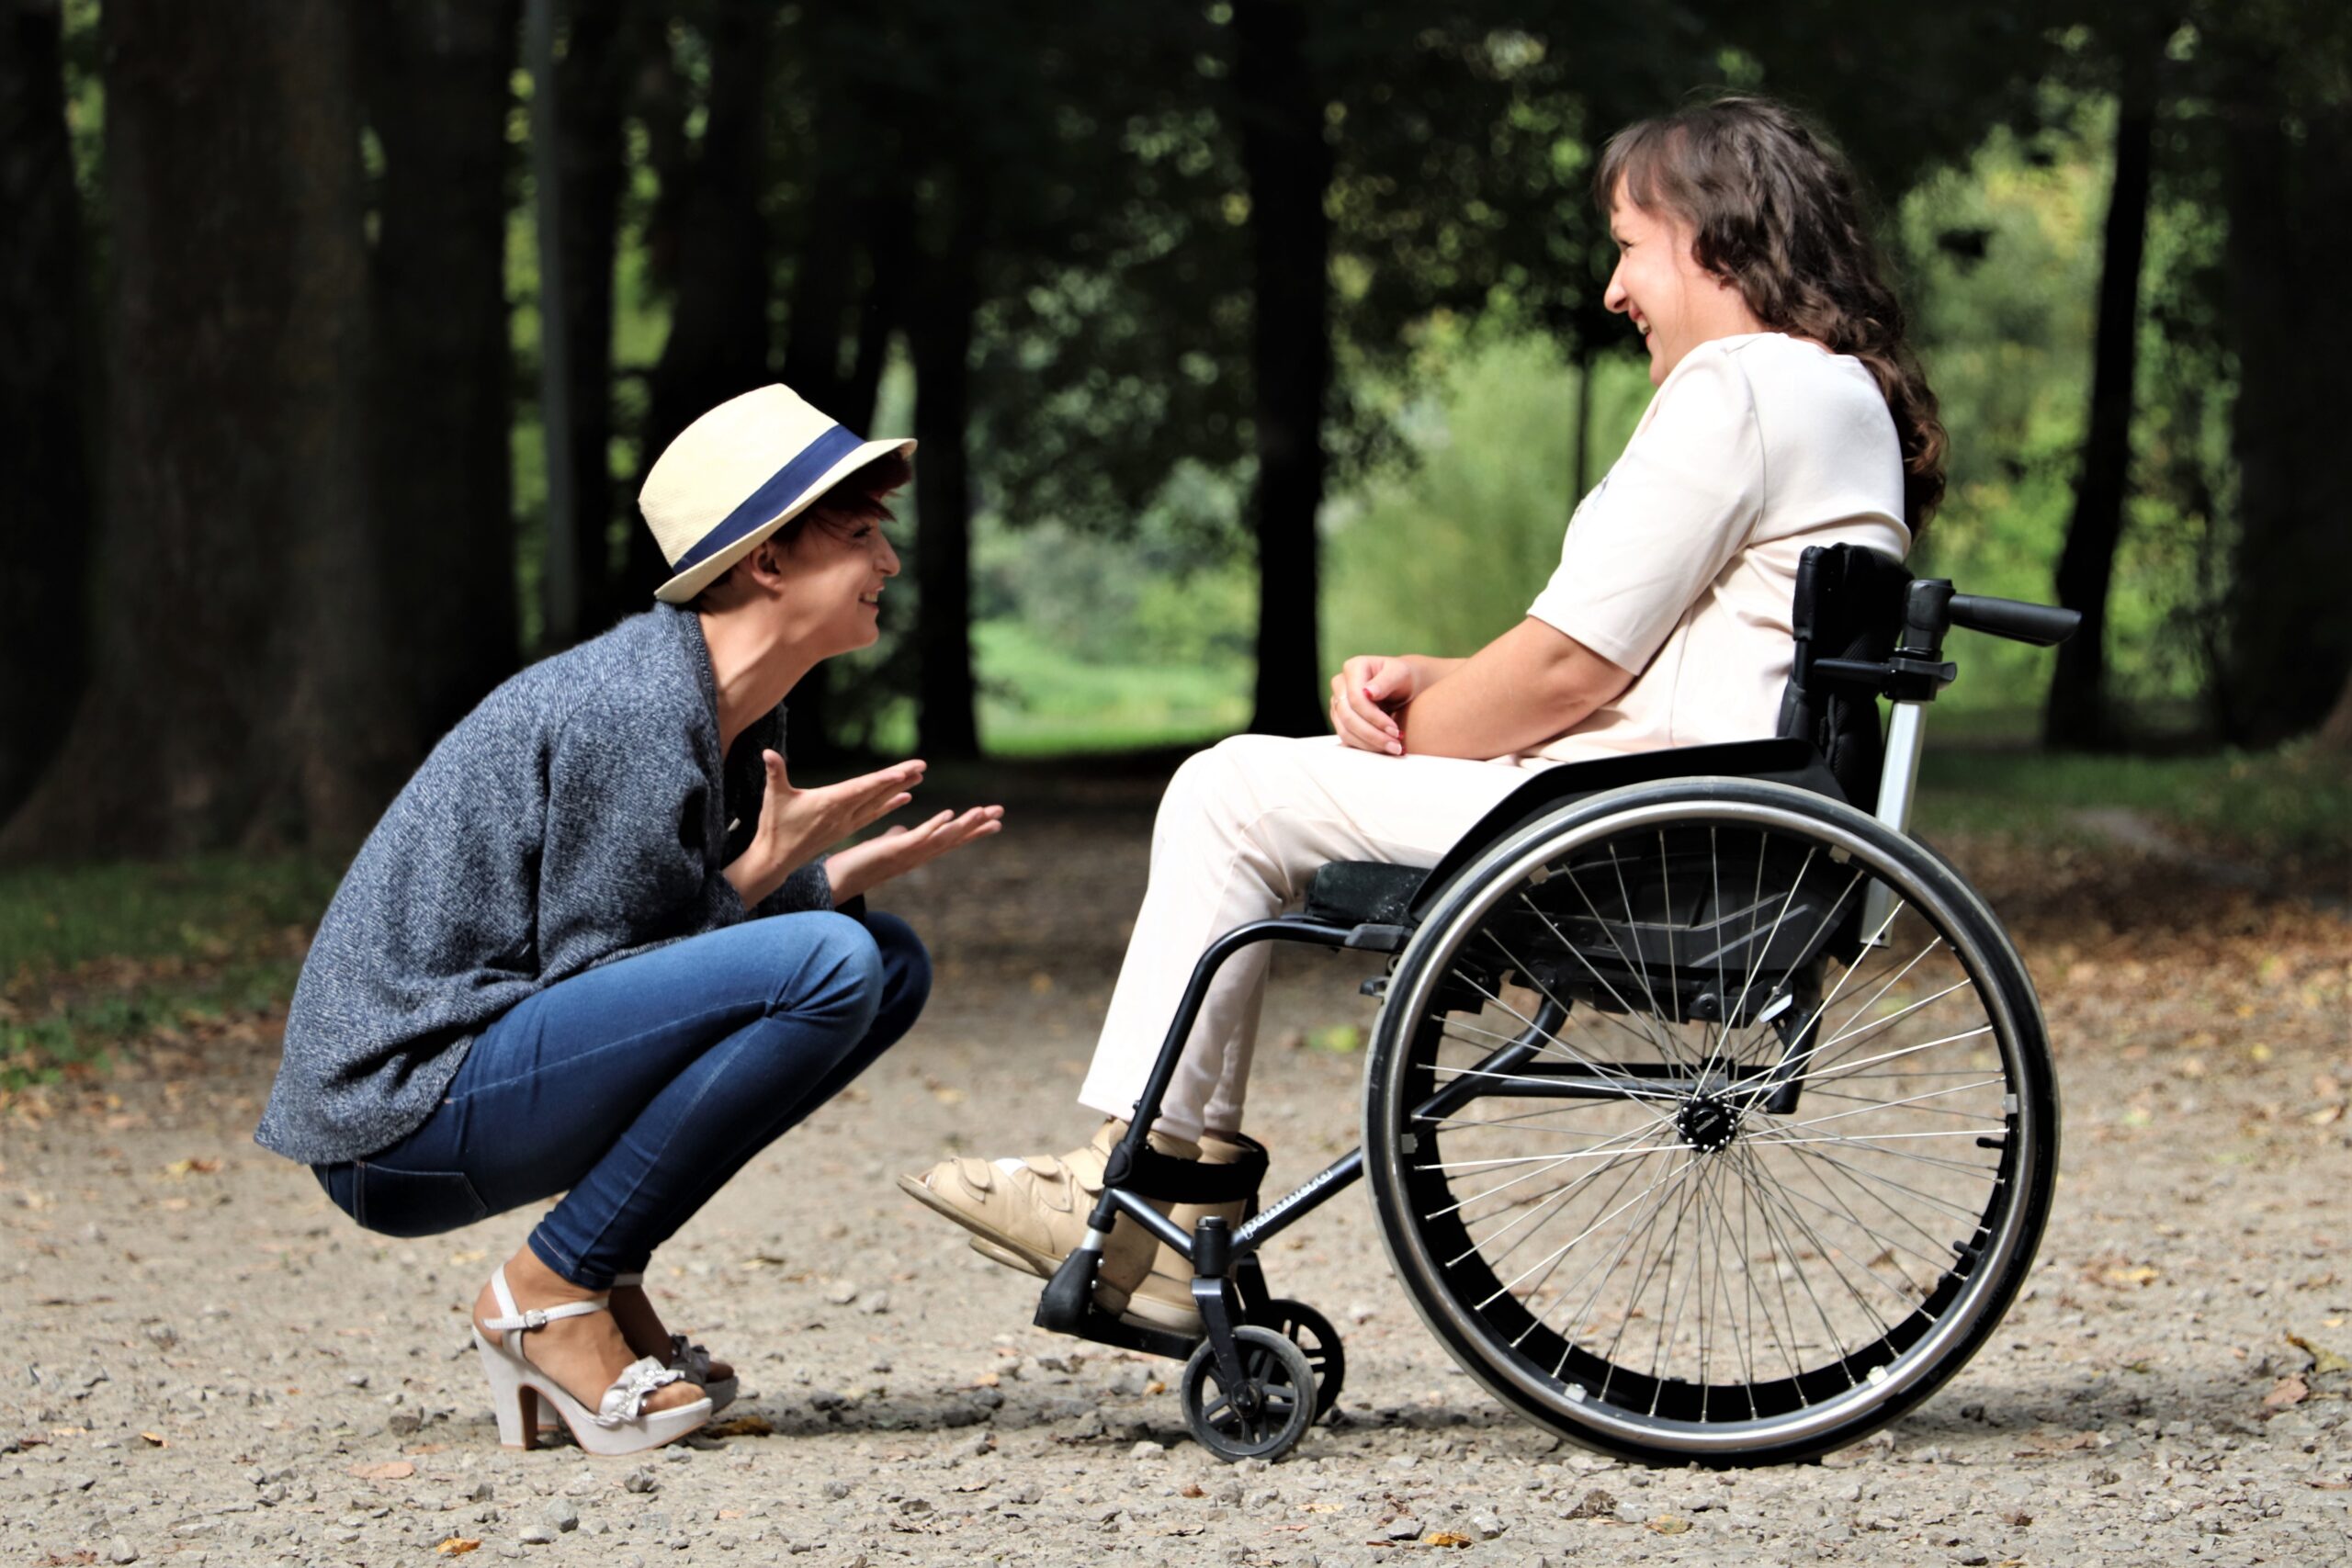 A woman on a wheelchair and another woman sitting chatting opposite her on the ground, to be on eye-level with the woman in the wheelchair.